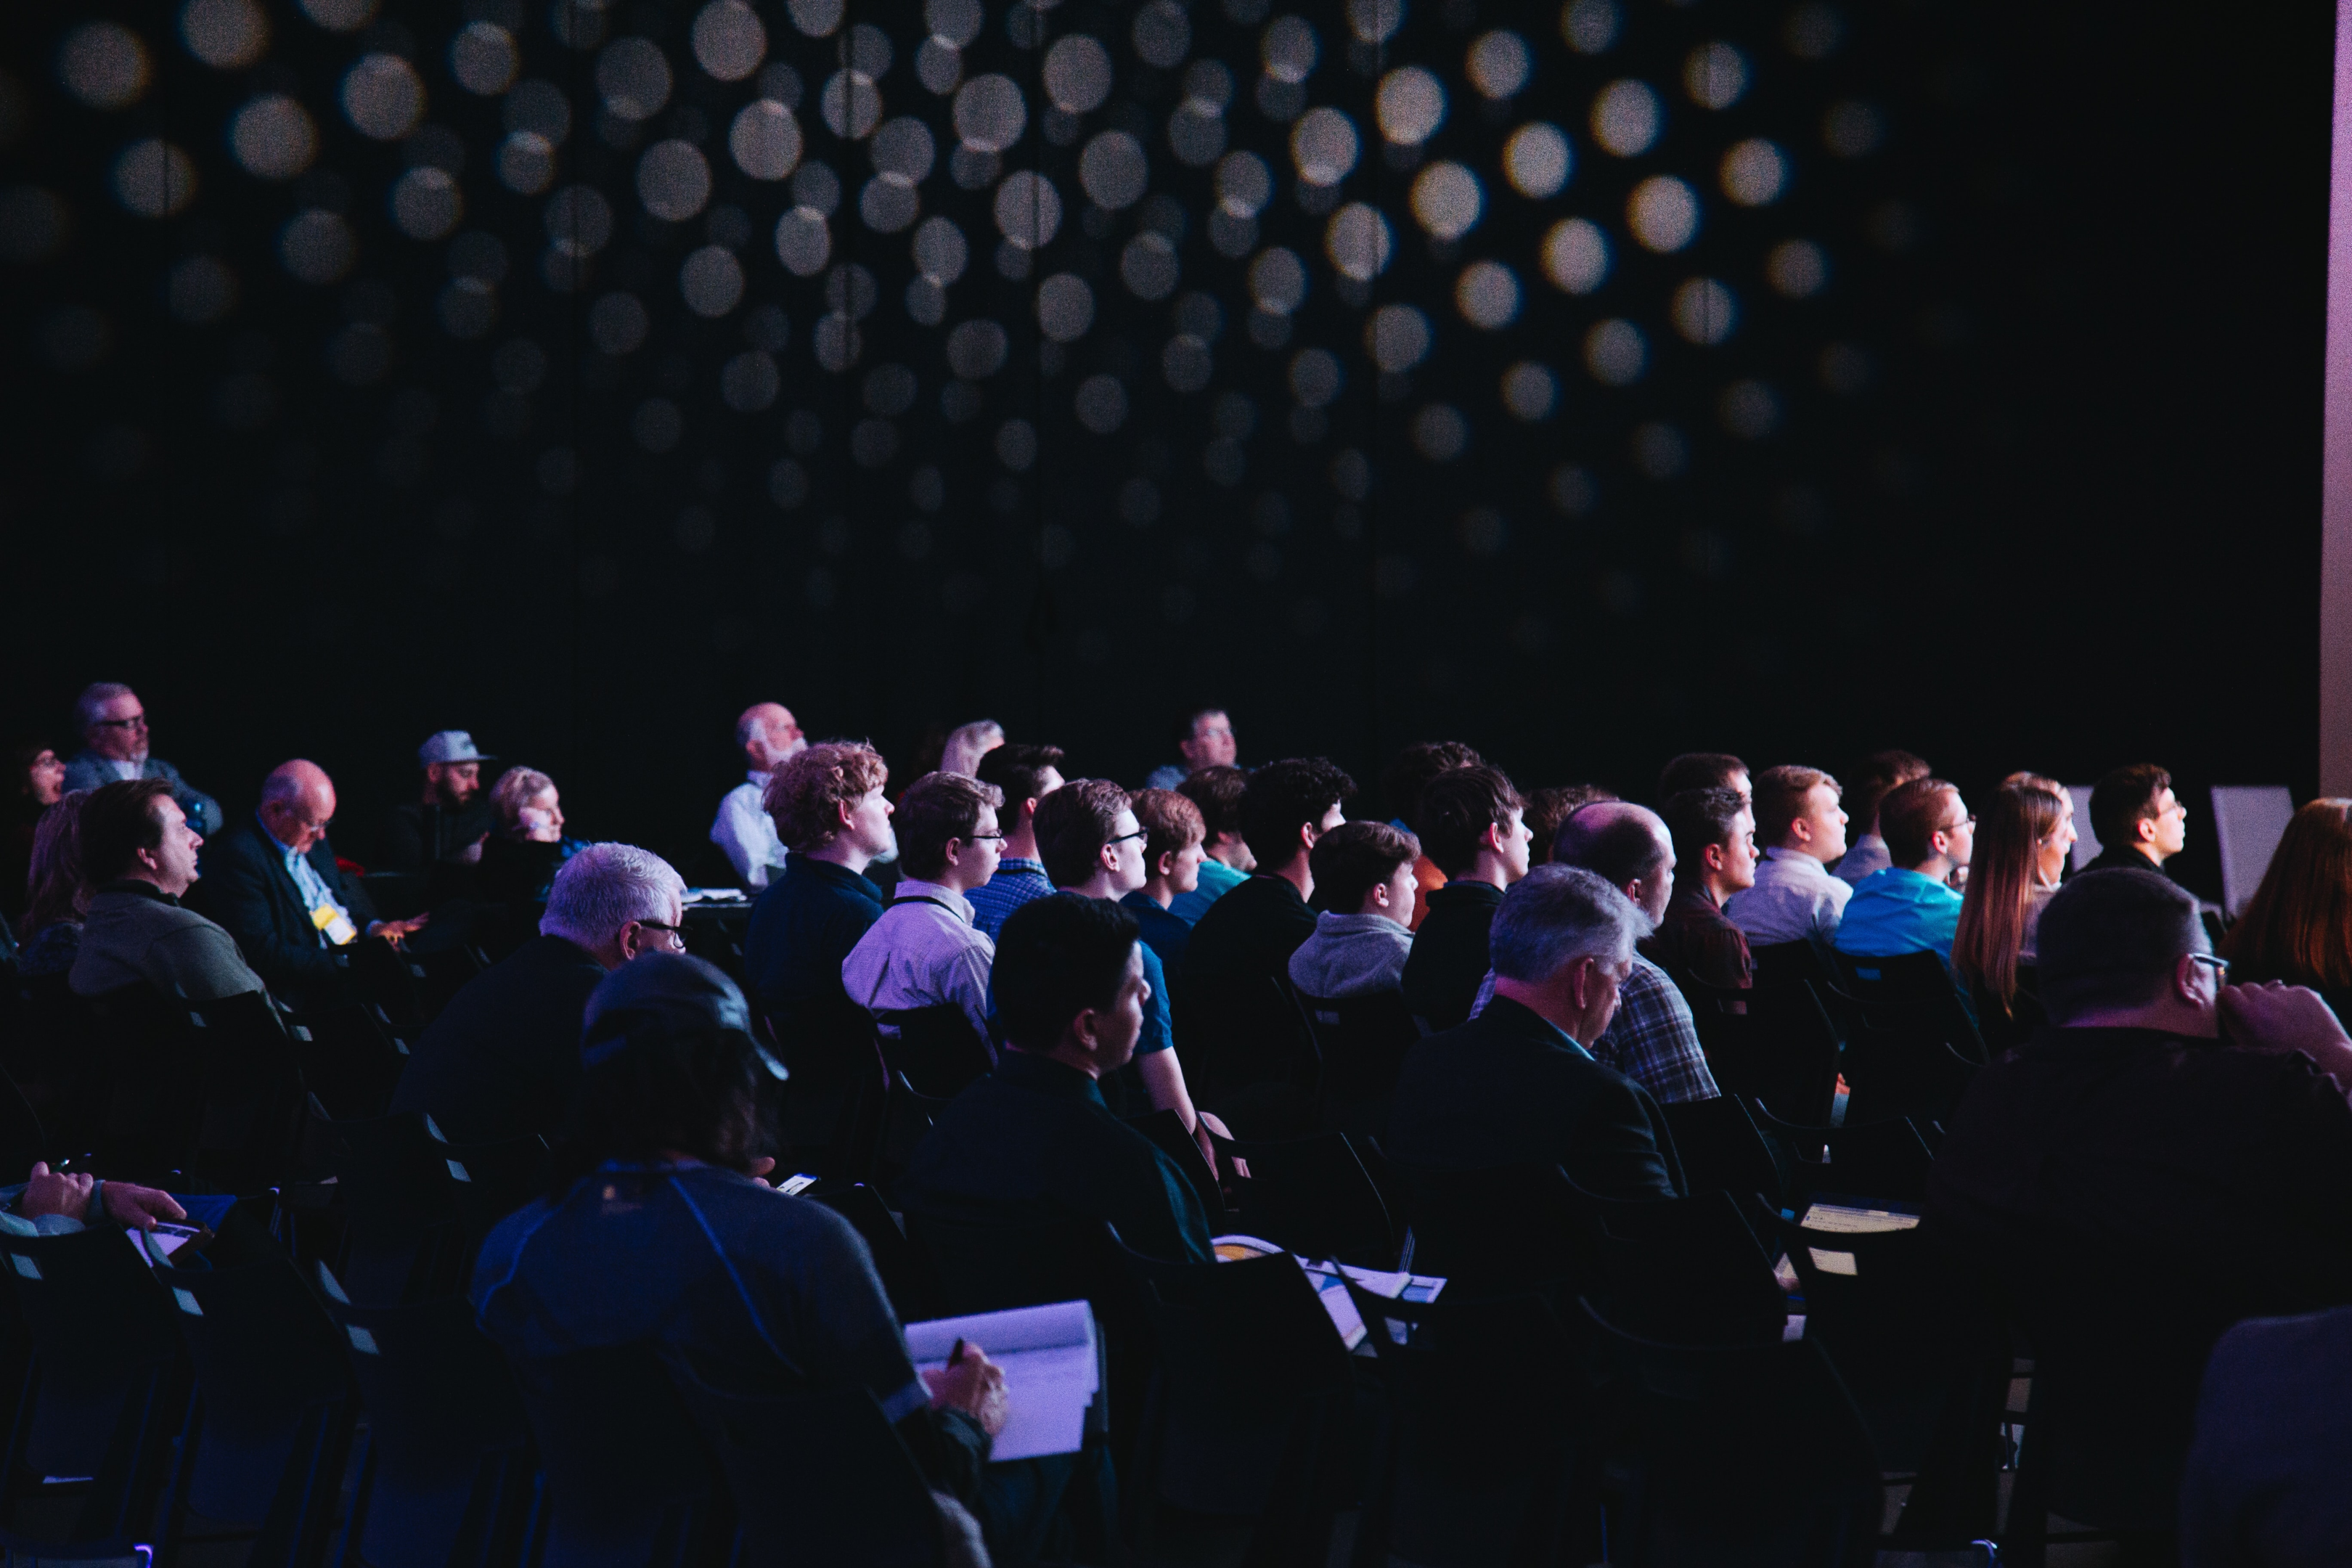 Face to Face Events Back on Track | Photo of a conference audience sitting. | Image link: https://images.unsplash.com/photo-1540575467063-178a50c2df87?ixlib=rb-1.2.1&ixid=MnwxMjA3fDB8MHxwaG90by1wYWdlfHx8fGVufDB8fHx8&auto=format&fit=crop&w=1170&q=80